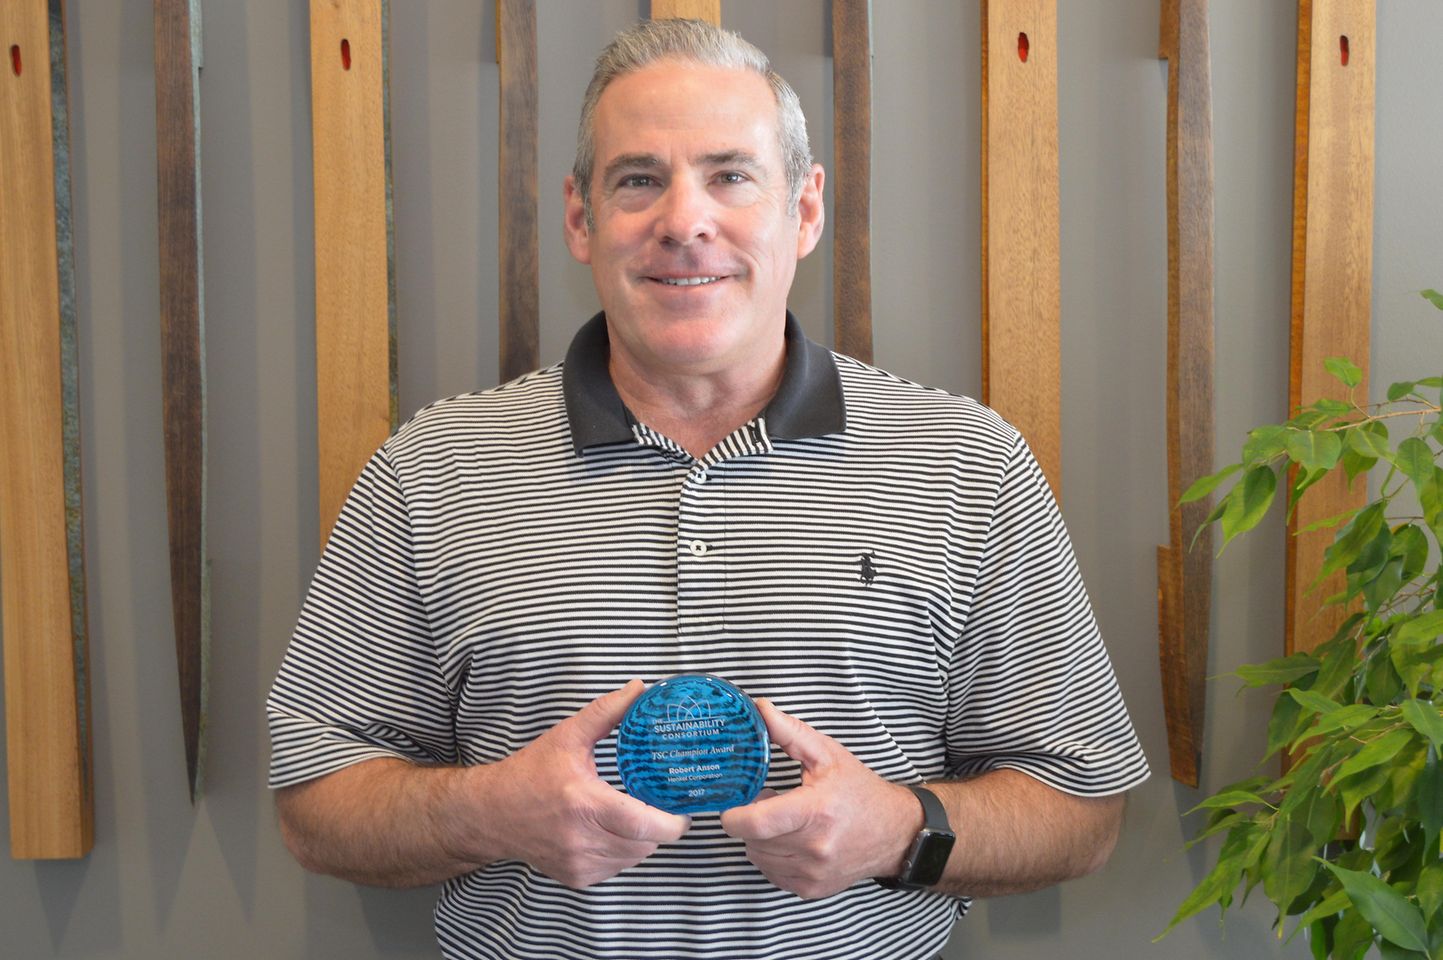 The Sustainability Consortium presented Rob Anson with a Champion Award for his contributions and support of their mission.